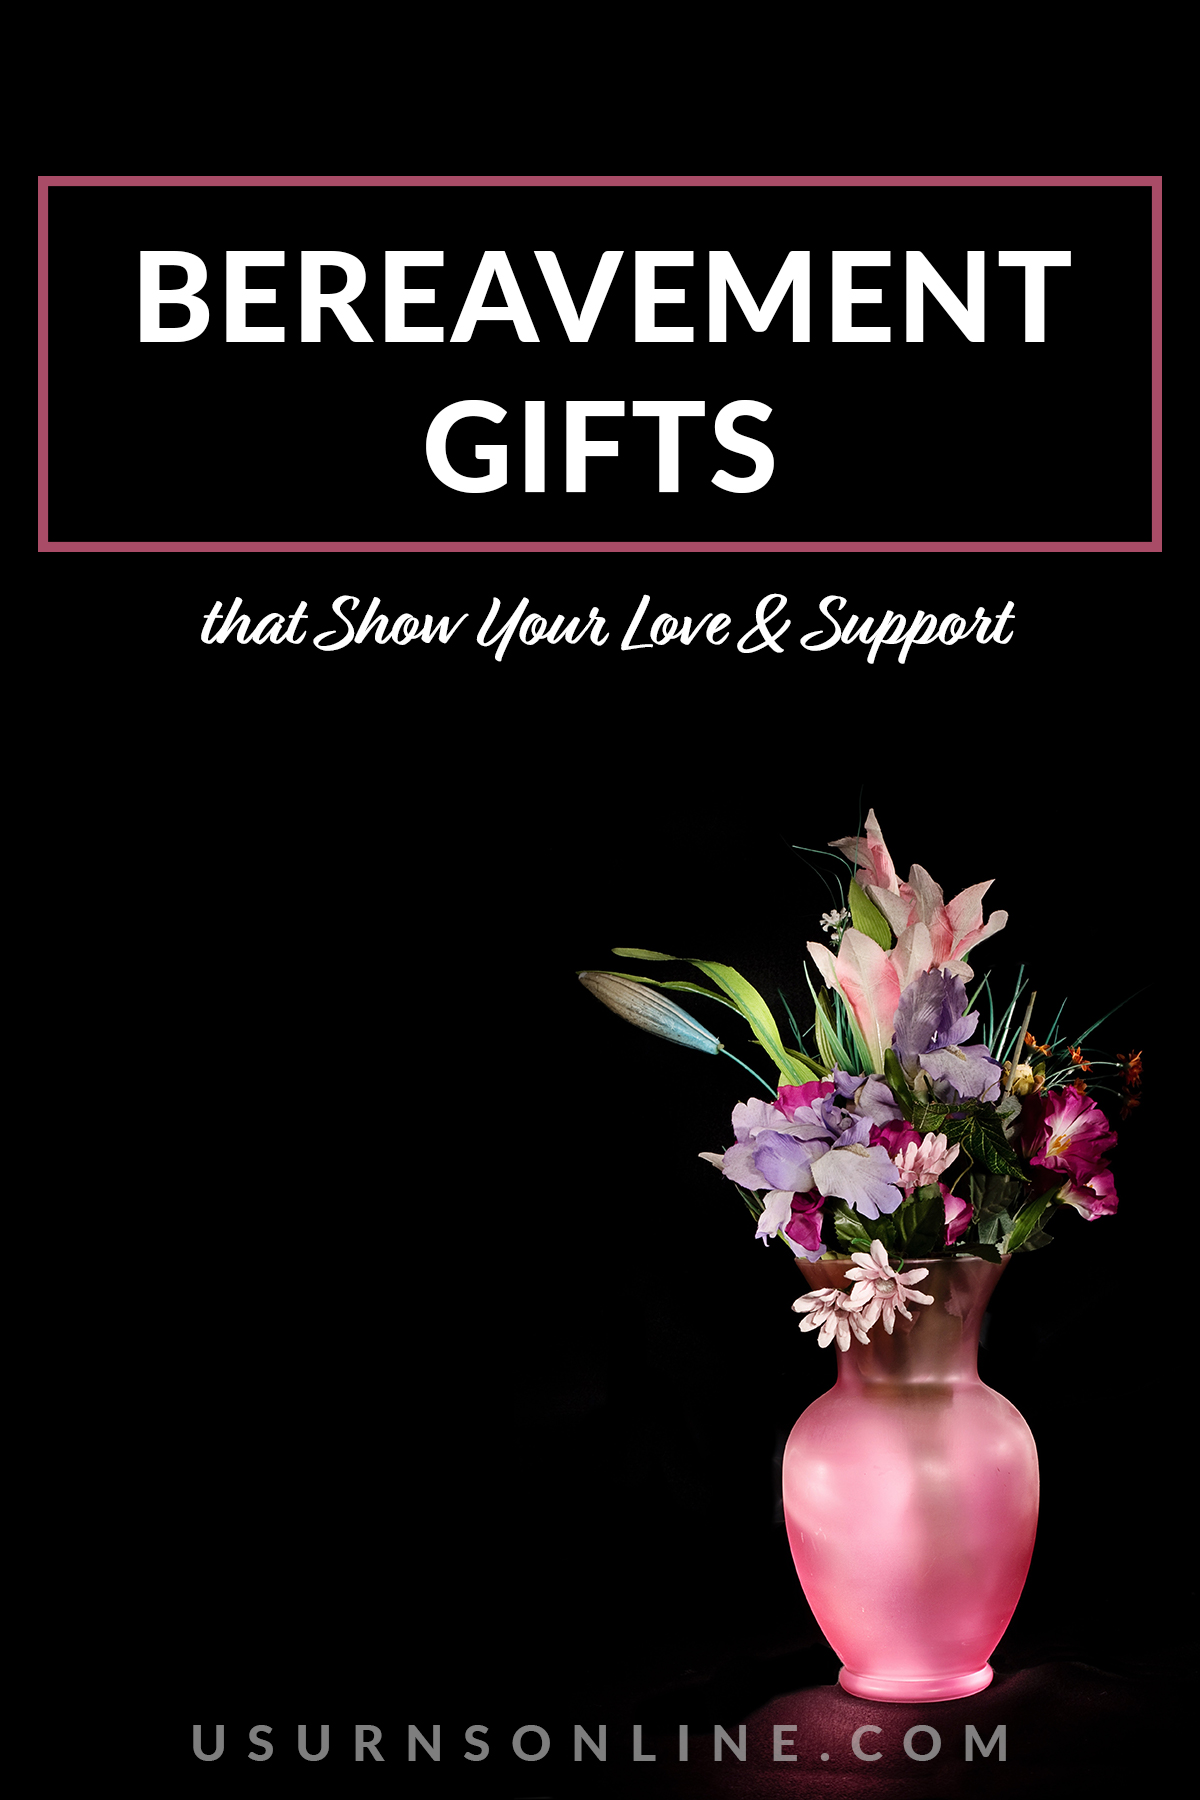 bereavement gifts - feature image